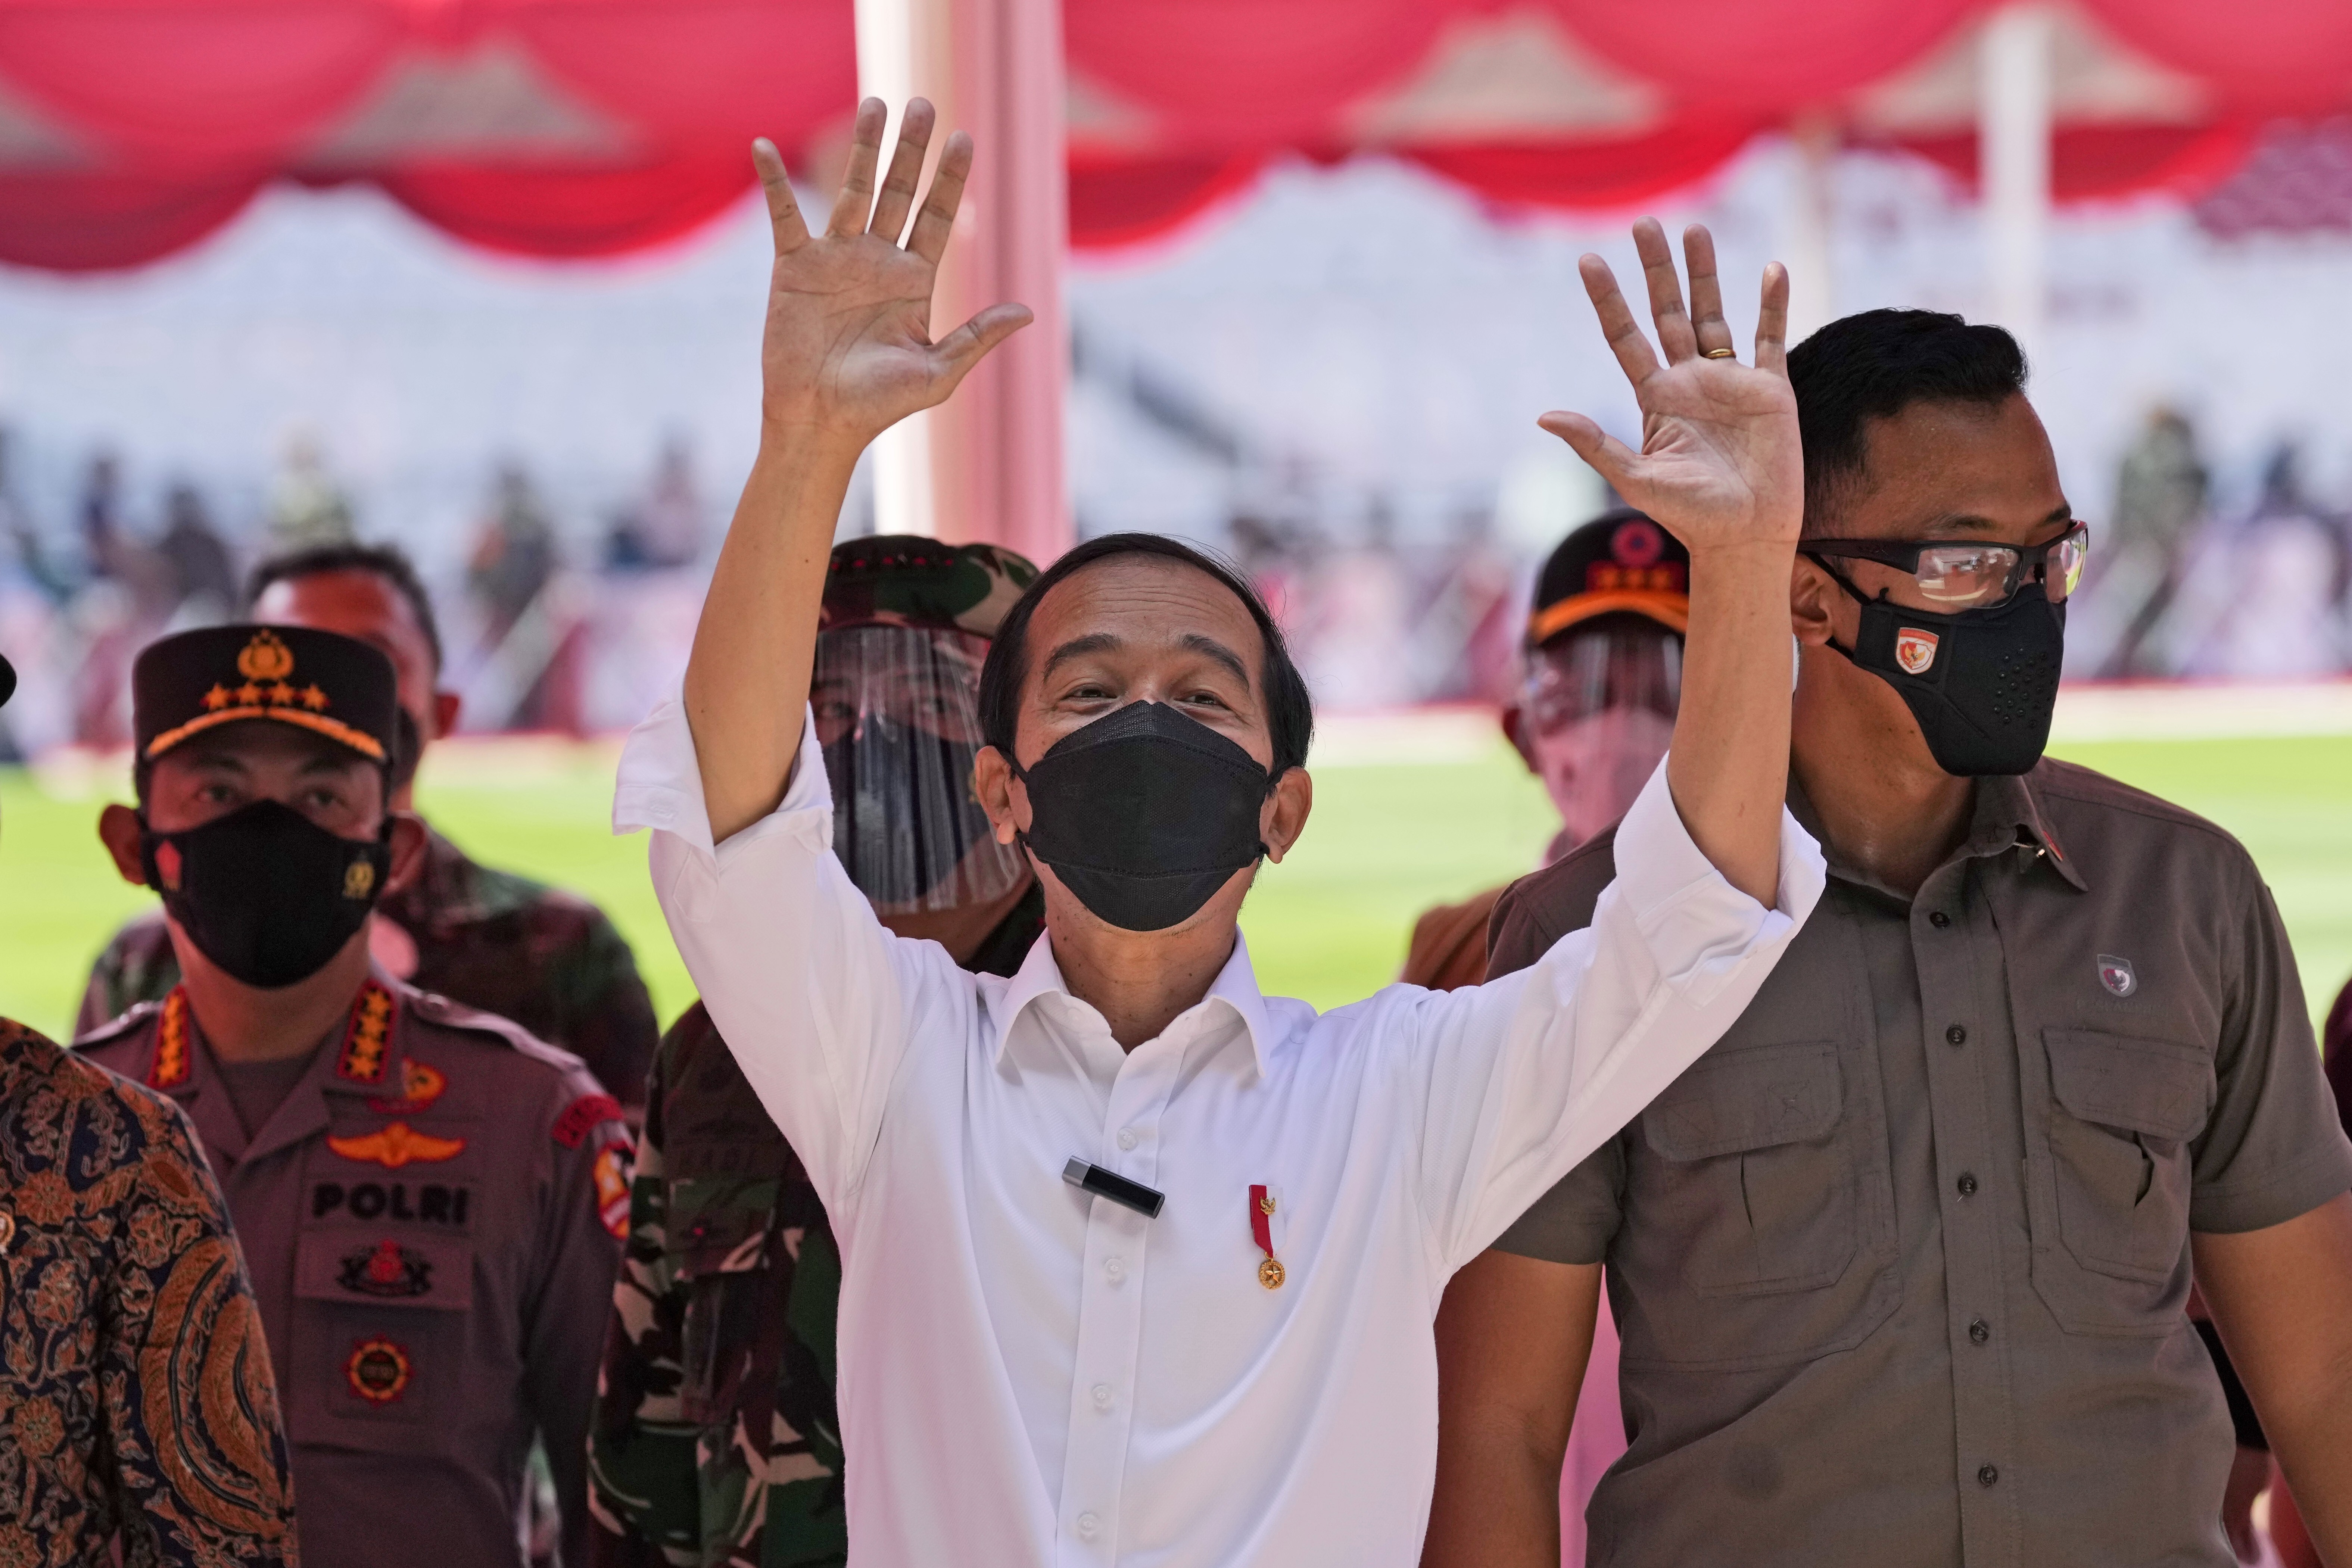 Indonesian President Joko Widodo waves during a visit to a mass vaccination campaign at a stadium in Jakarta last month. Photo: AP